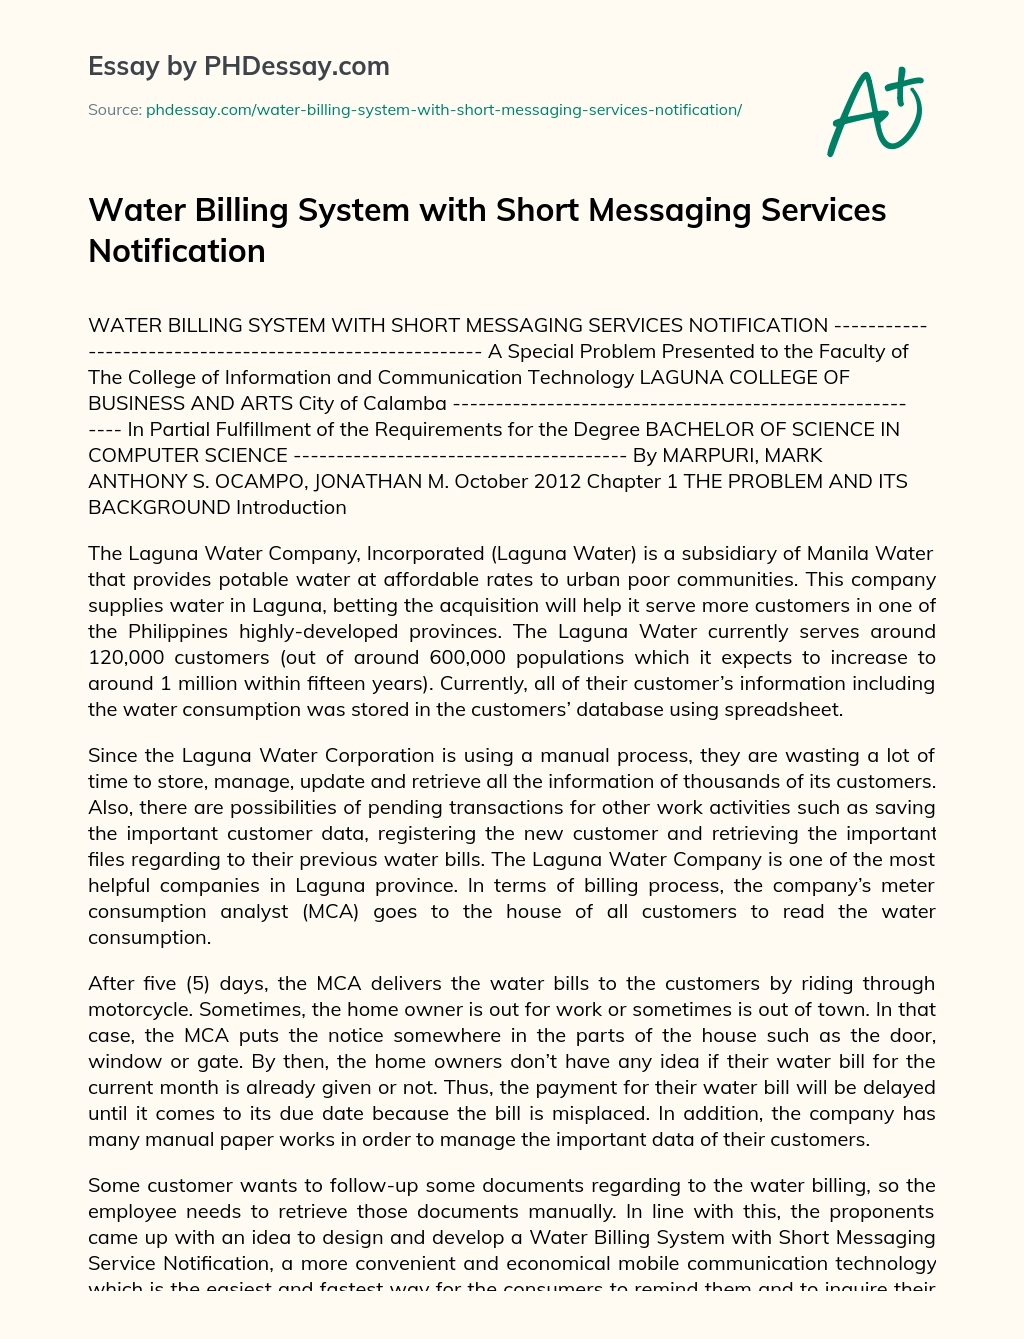 Water Billing System with Short Messaging Services Notification essay